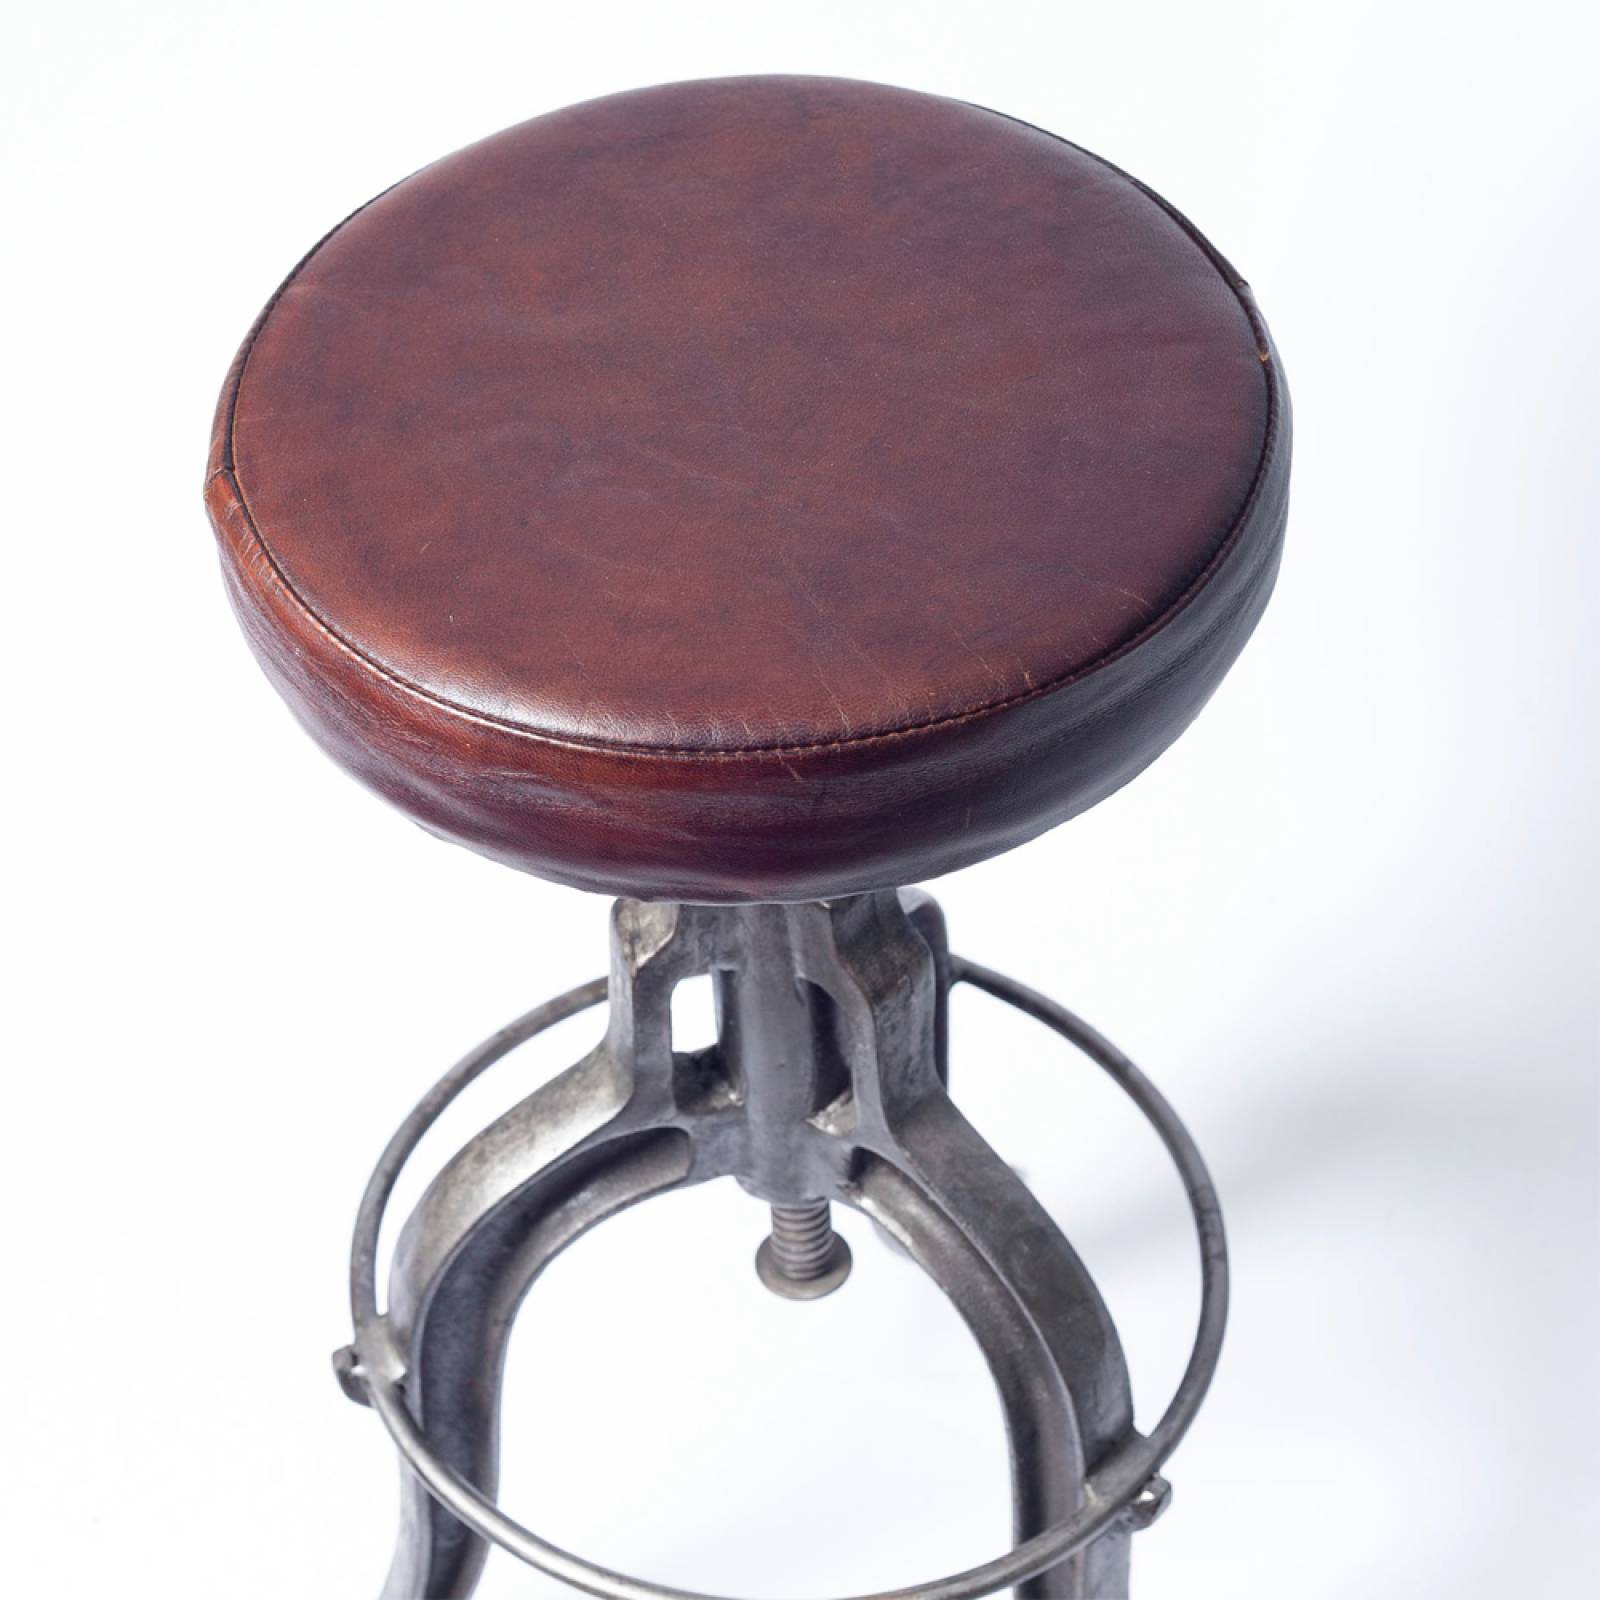 Saloon Style Metal Adjustable Stool With Leather Seat thumbnails